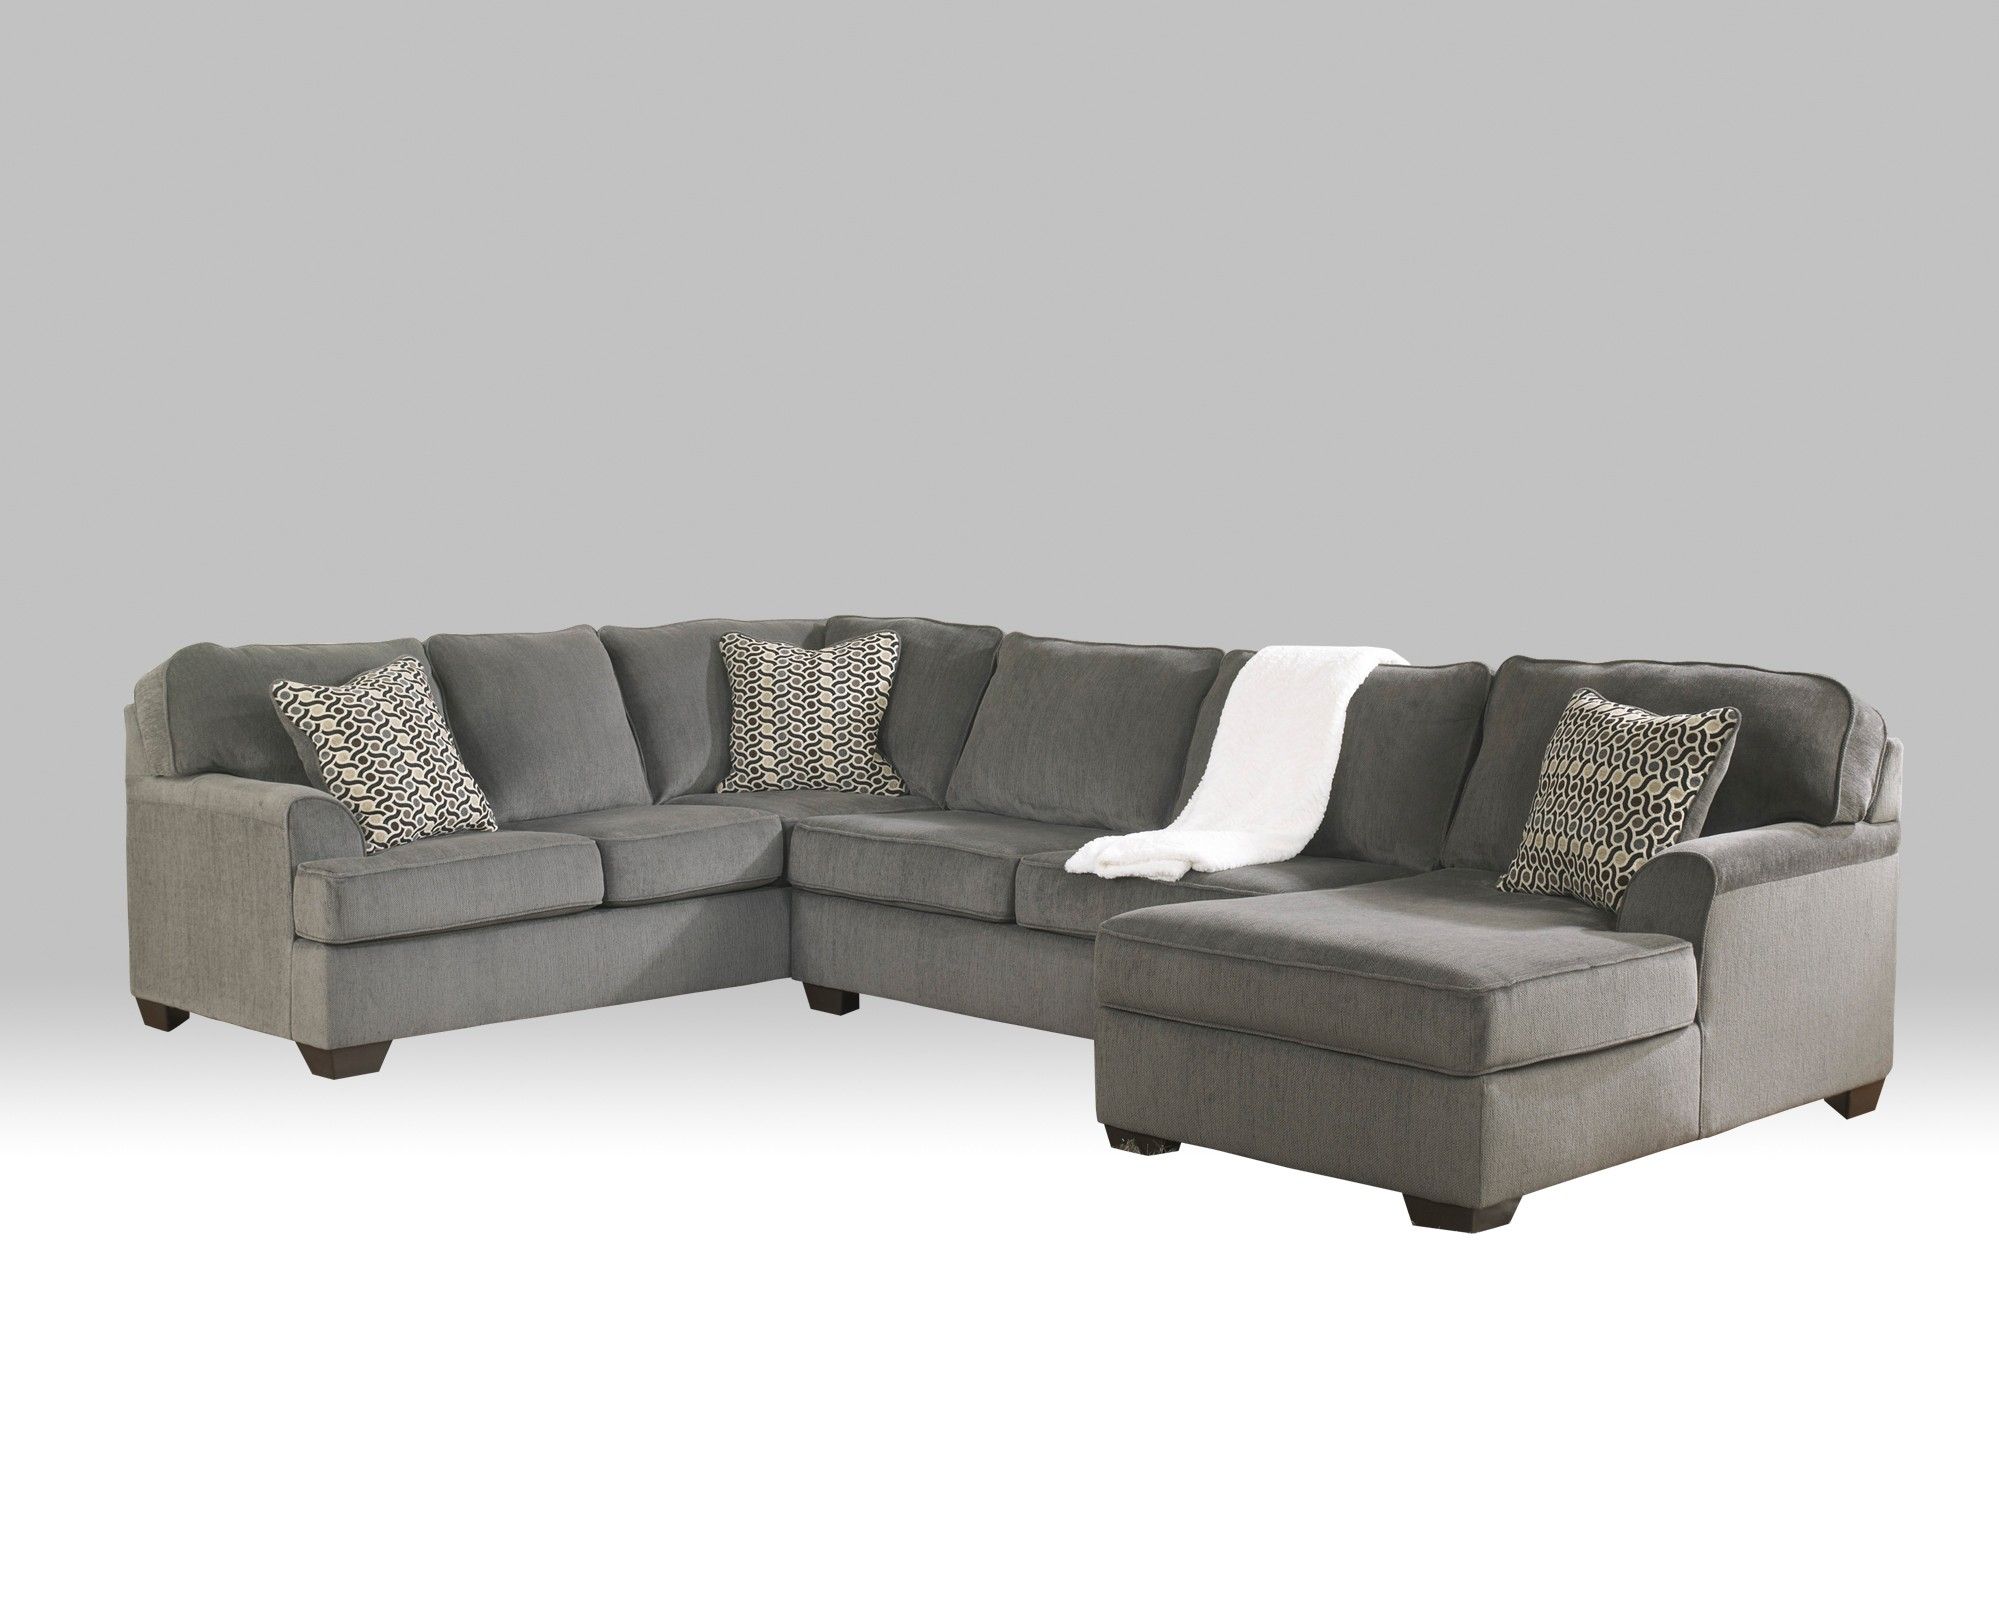 Furniture : Sectional Couch That Looks Like A Bed Sectional Couch Regarding Victoria Bc Sectional Sofas (View 9 of 10)